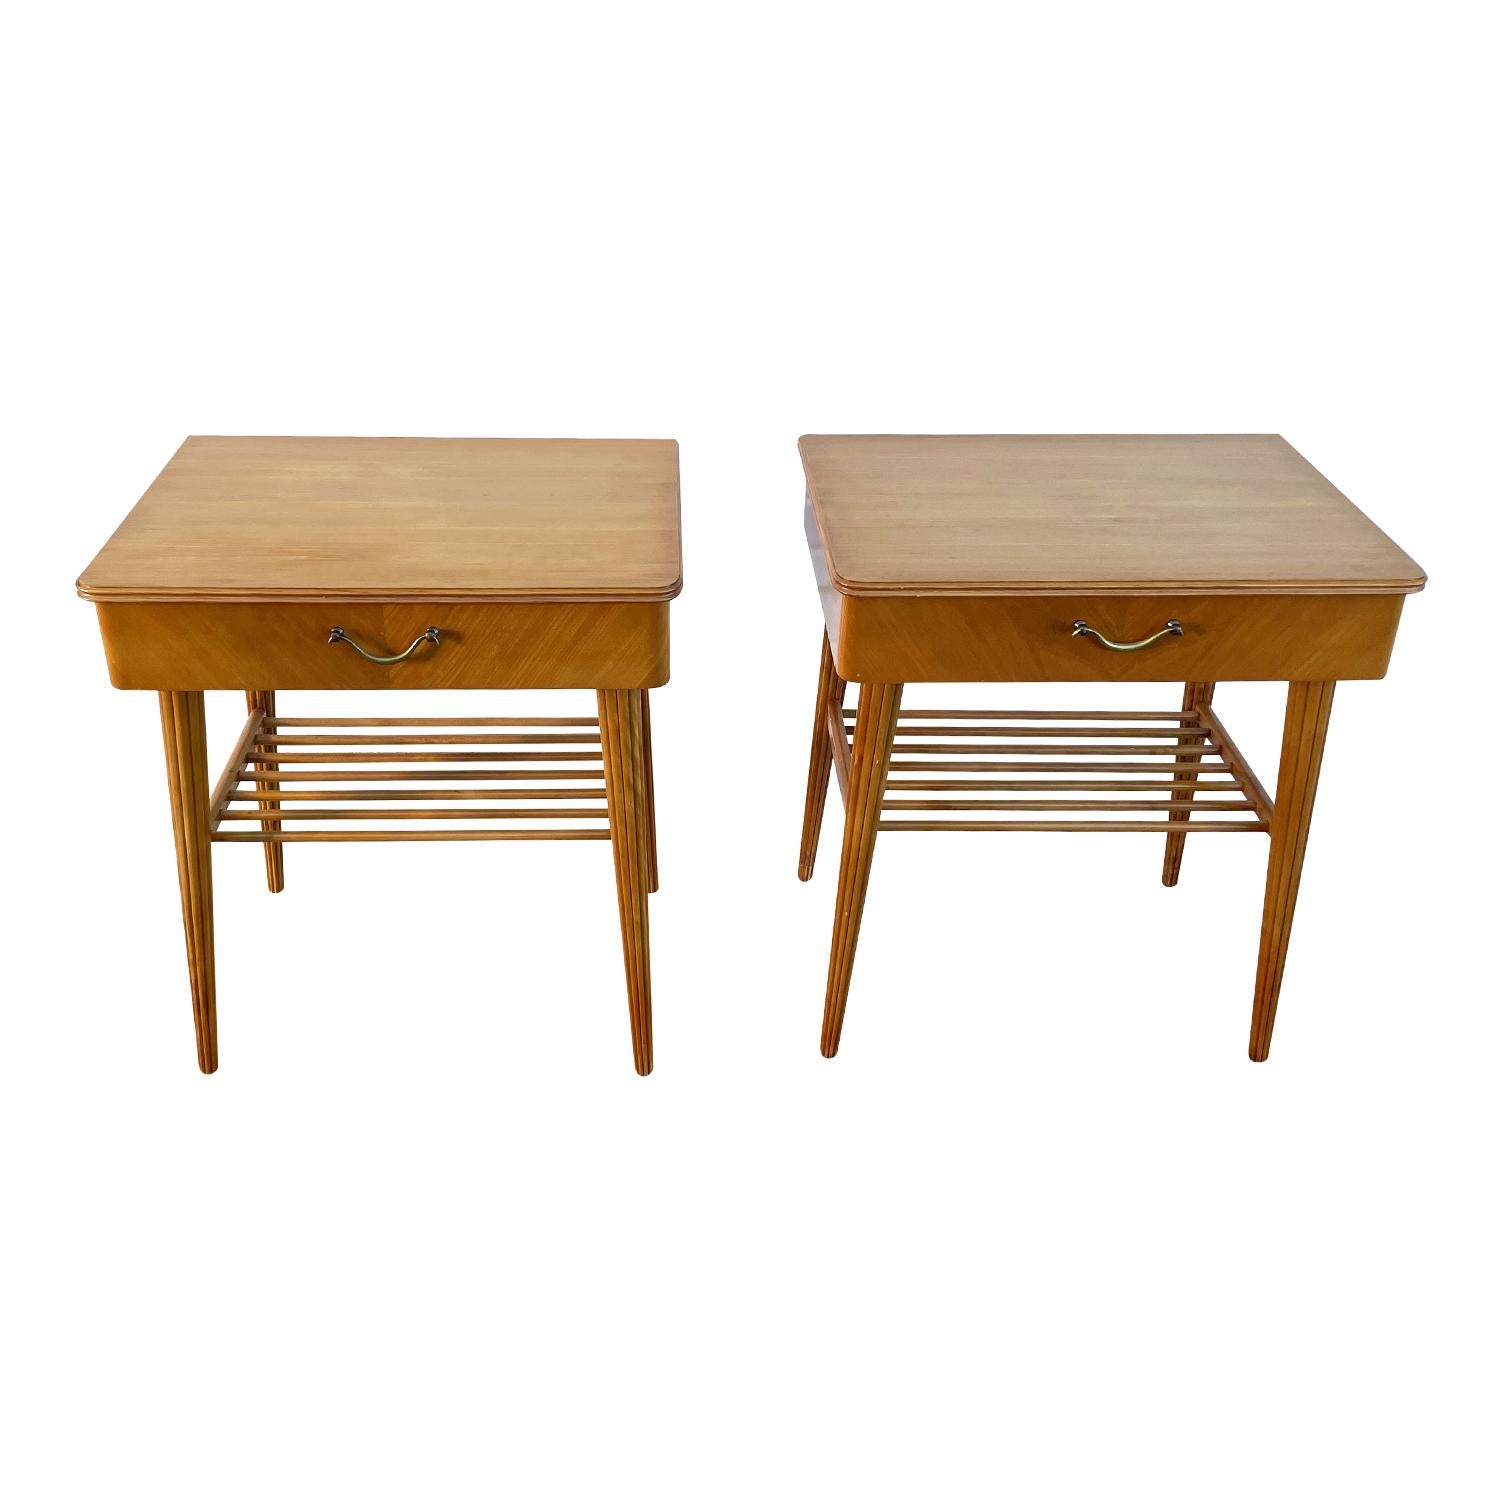 Hand-Carved 20th Century Danish Pair of Birchwood Nightstands - Vintage Brass Bedside Tables For Sale